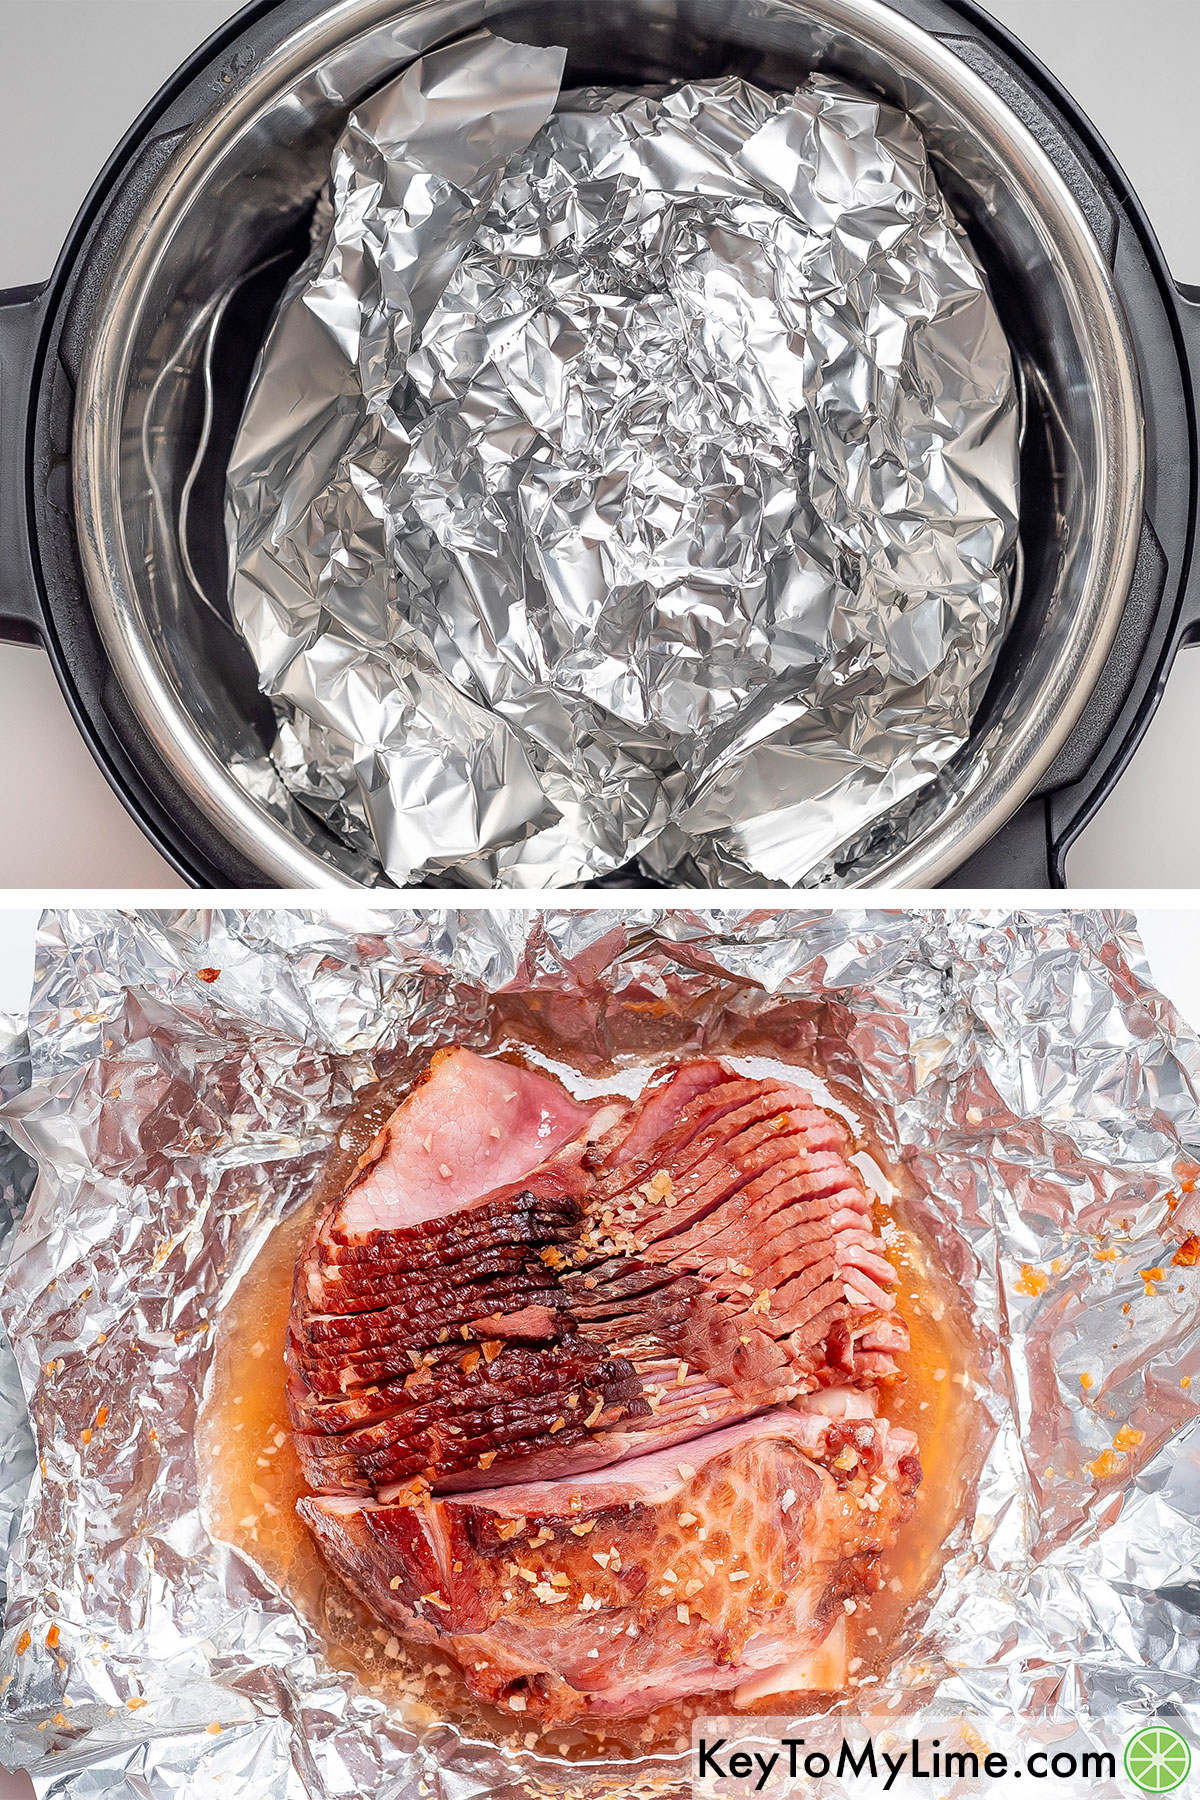 Placing the wrapped ham into the Instant Pot and then cooking.